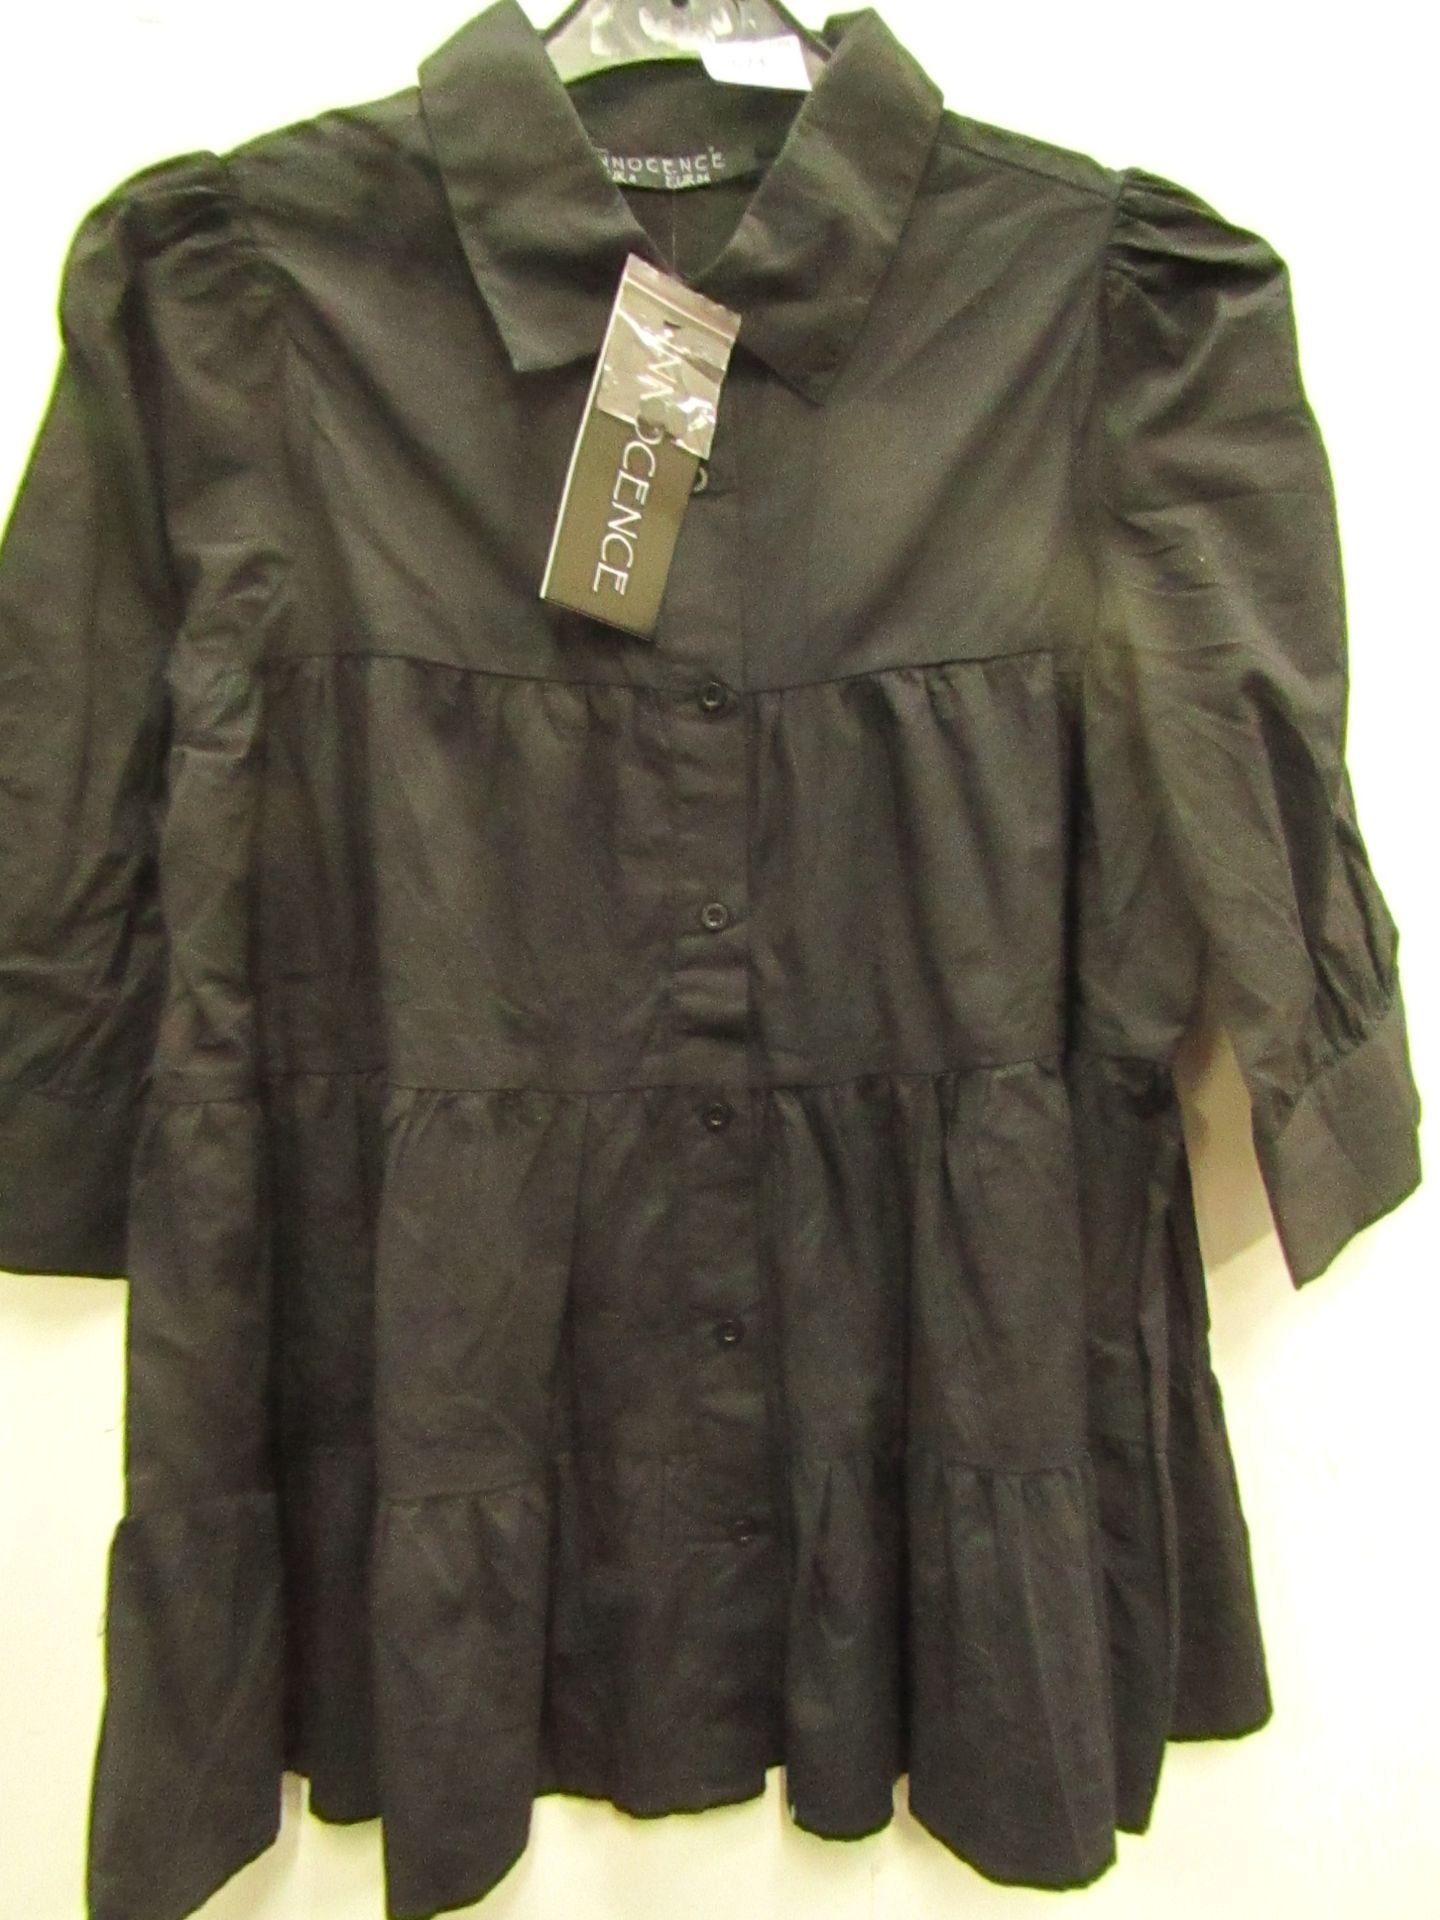 Innocence Ladies Black Blouse size 8 new with tag